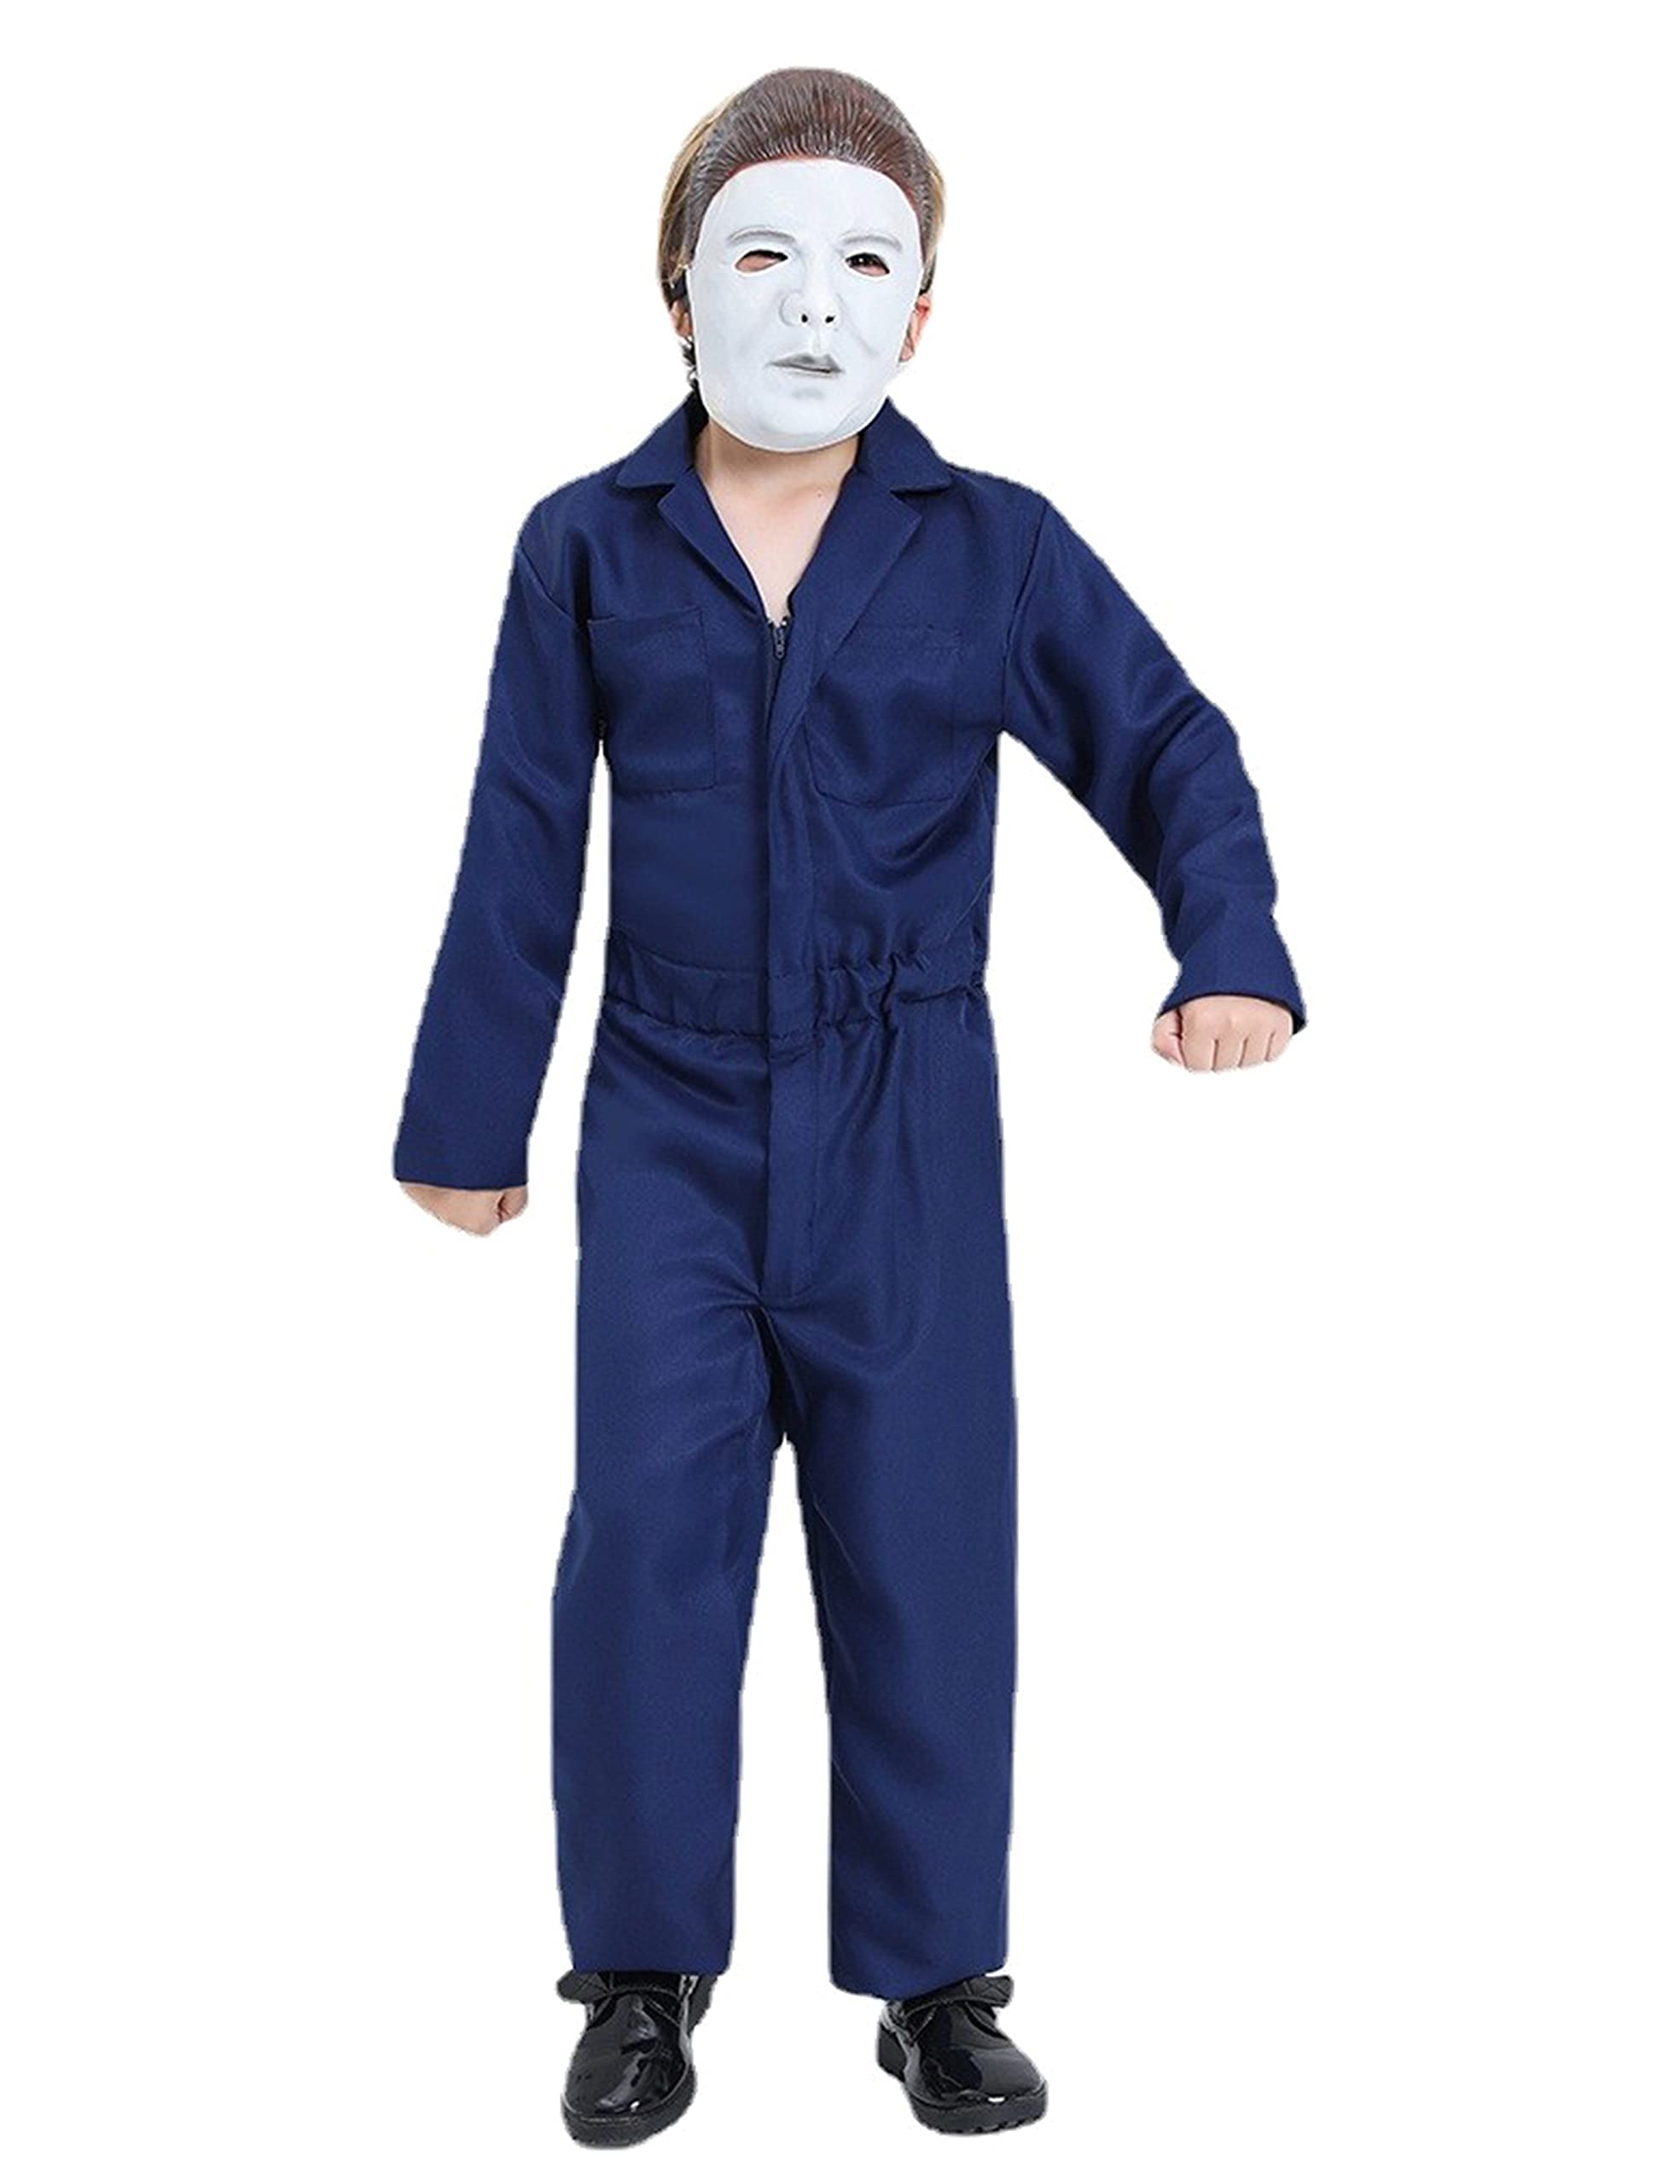 Firecos Halloween Horror Killer Cosplay Jumpsuit Coveralls Costume Props Halloween Costume with Mask for Kids Boys